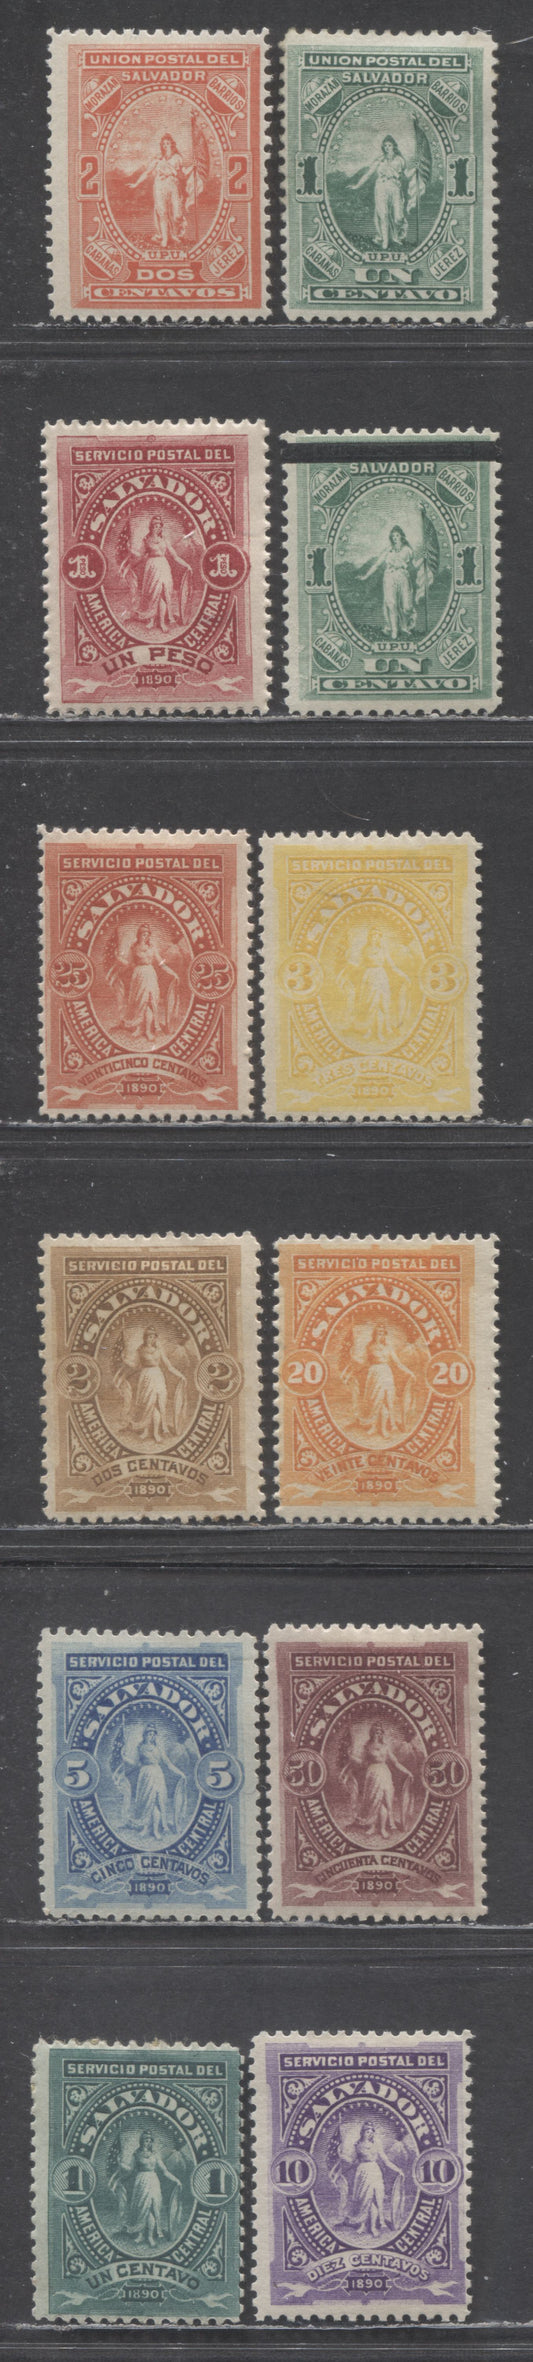 Lot 99 El Salvador SC#21/46 1889-1890 Liberty Issue, 12 F/VFOG Singles, Click on Listing to See ALL Pictures,2022 Scott Classic Cat. $6.95